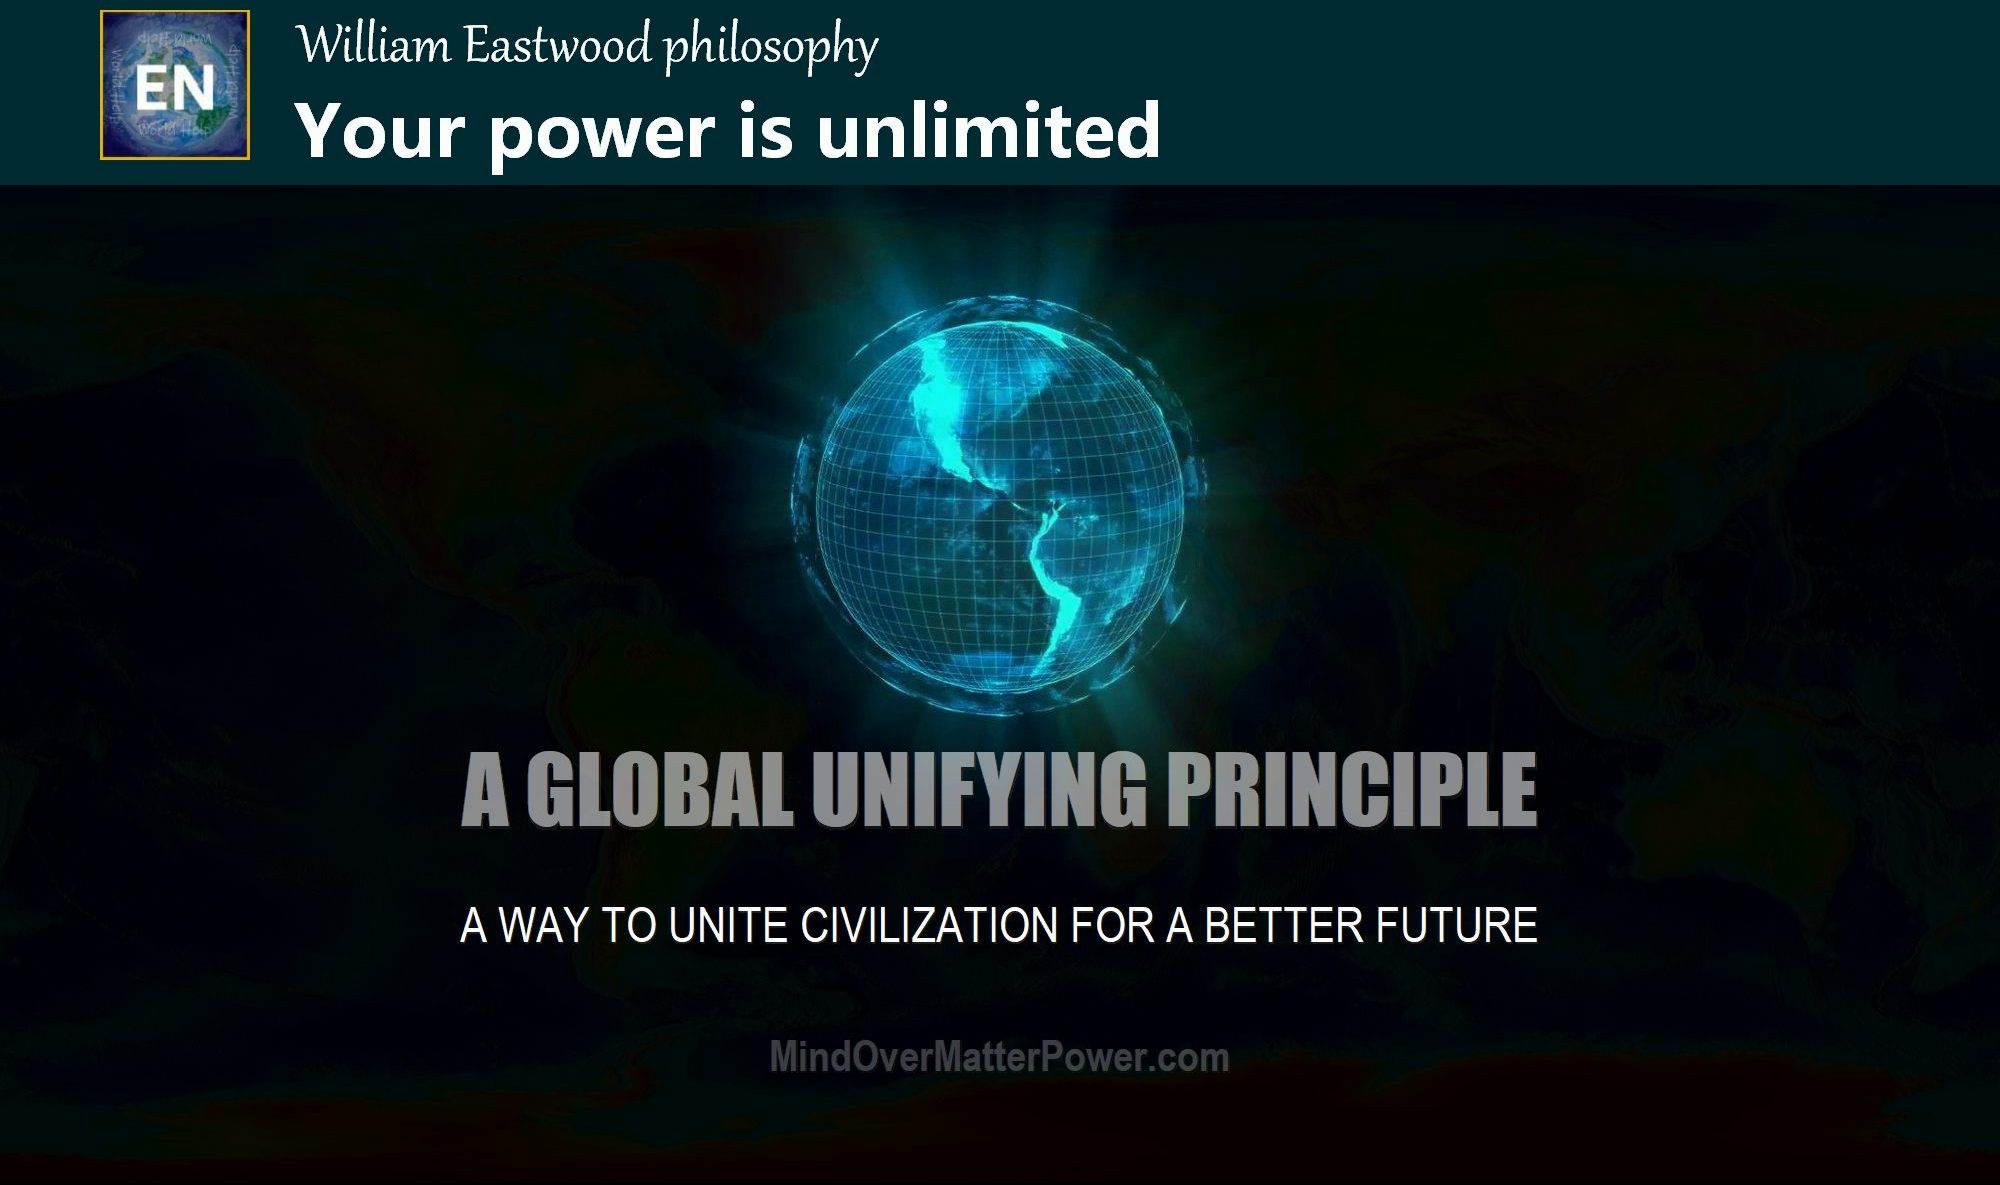 What-is-a-unifying-principle-way-to-unite-civilization-world-William-Eastwood-Earth-Network